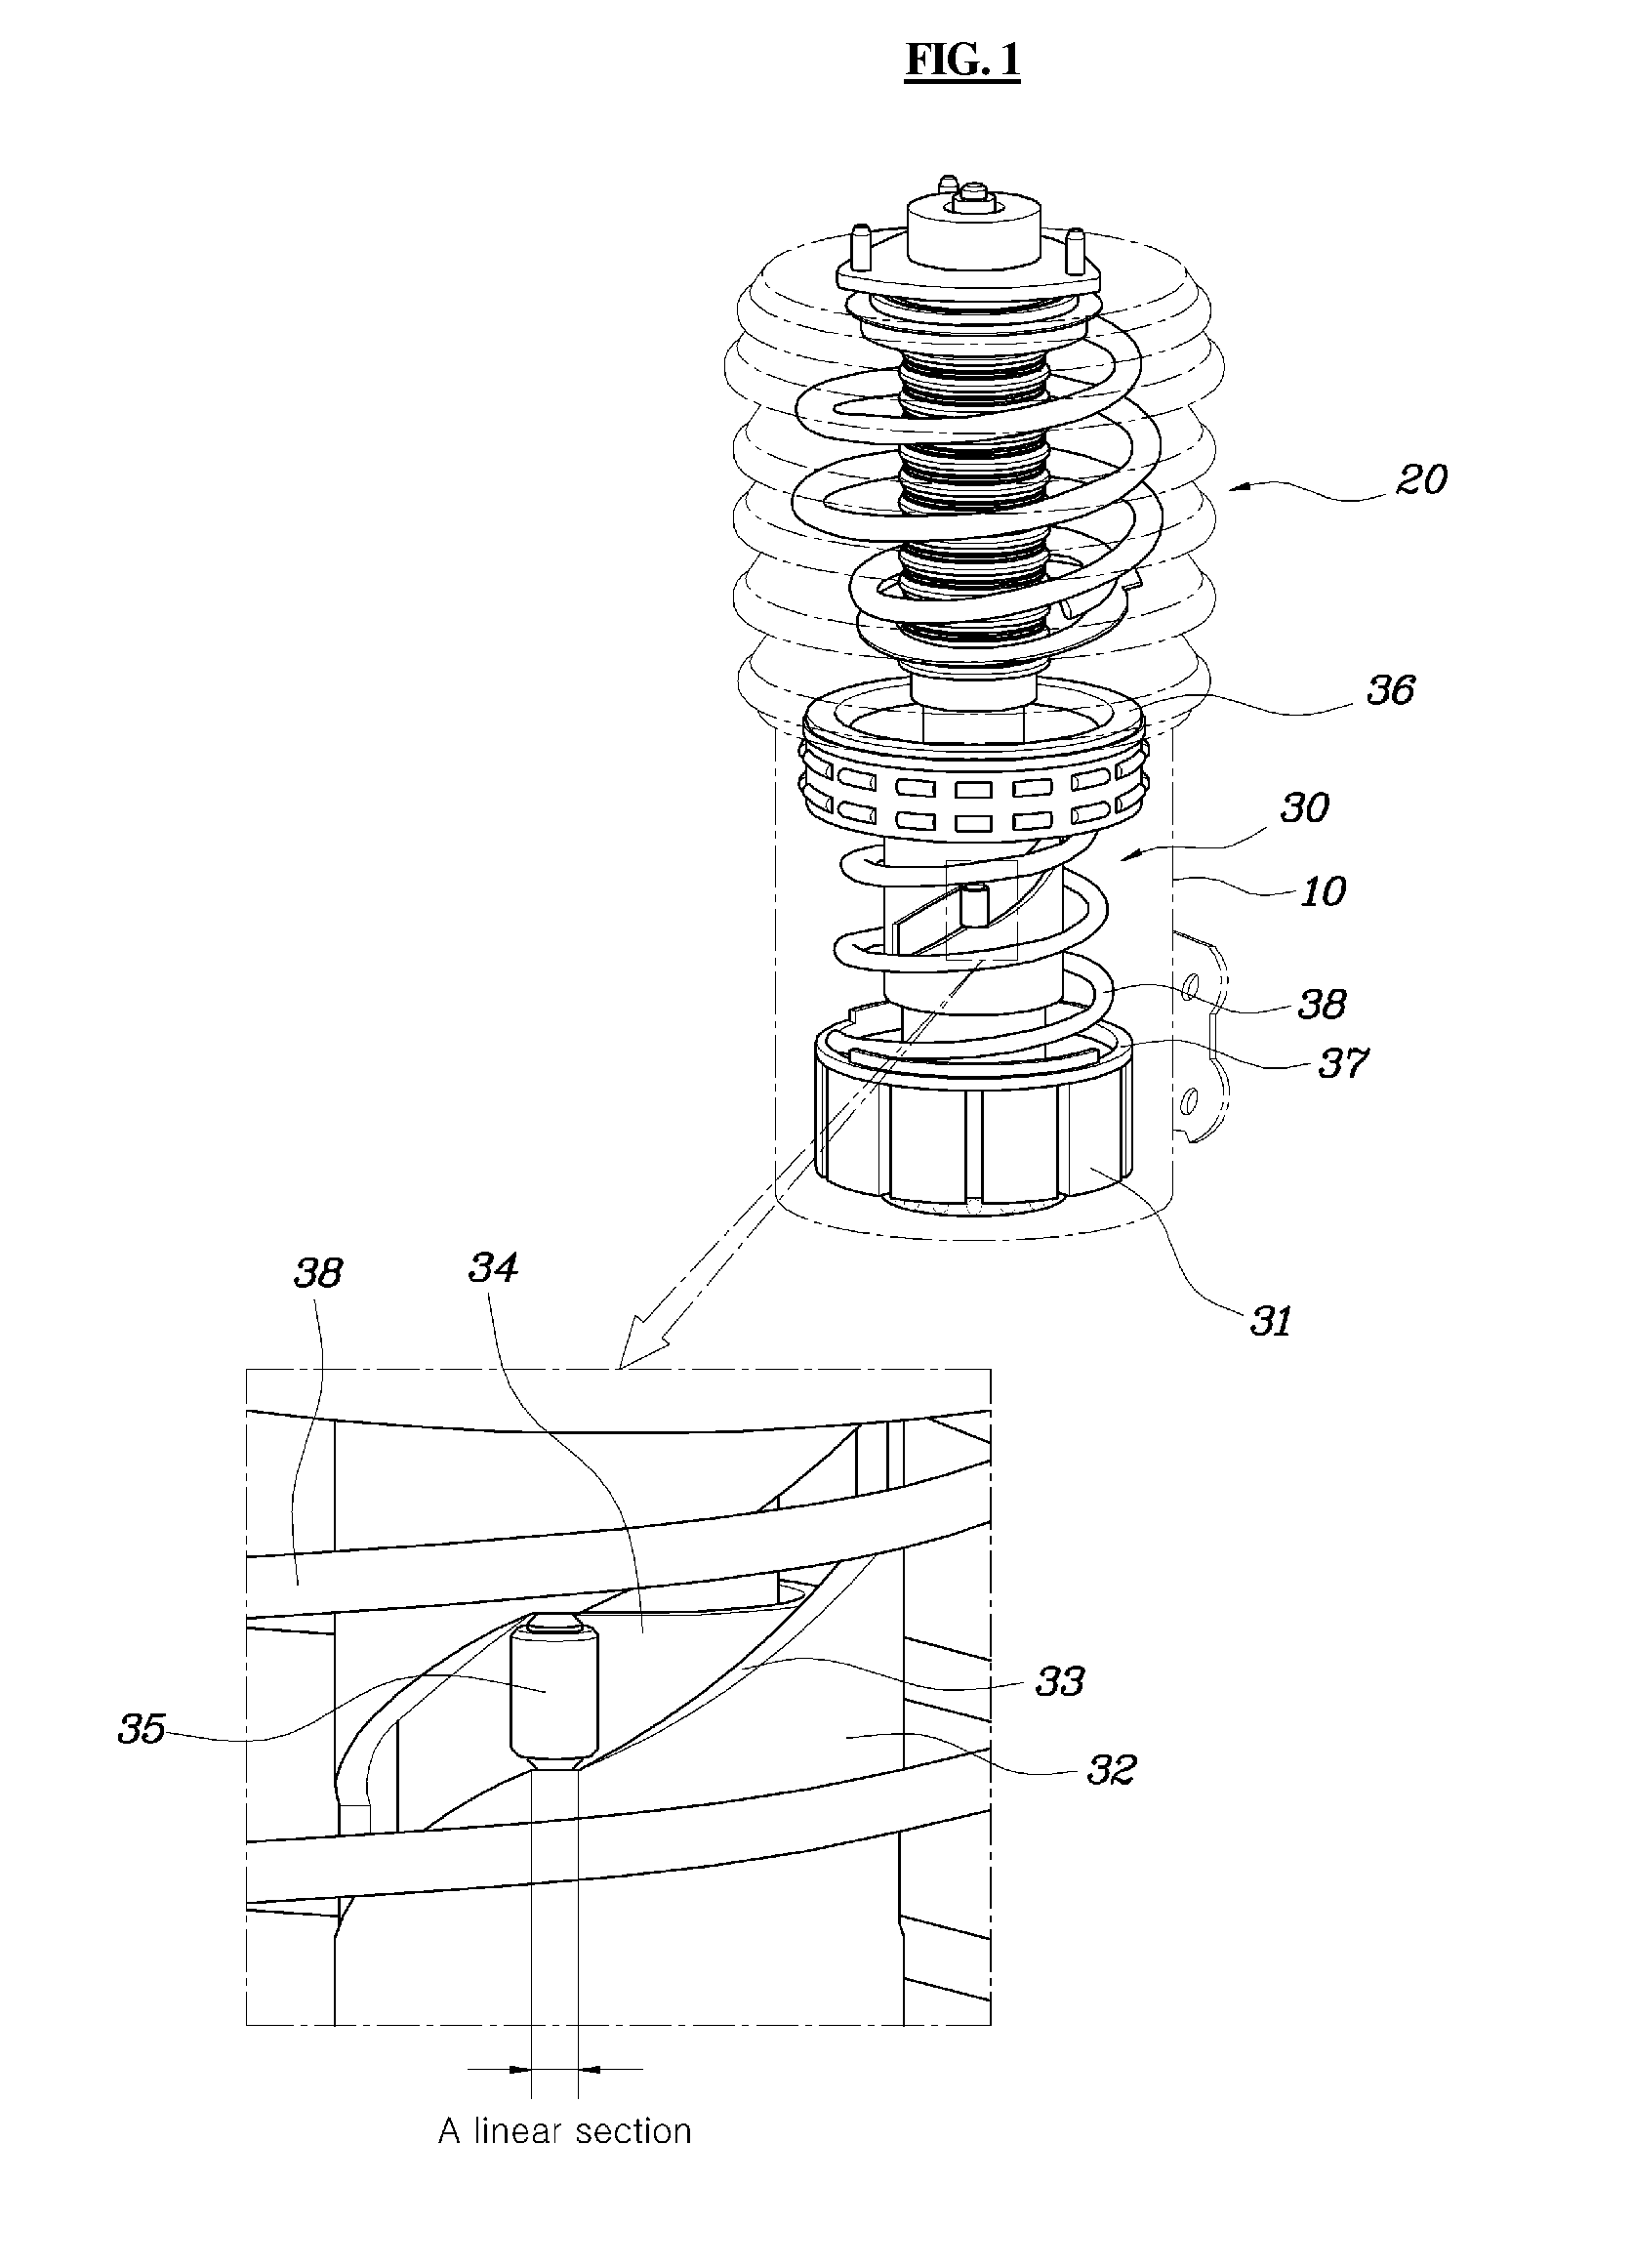 Electronic control suspension system for vehicles